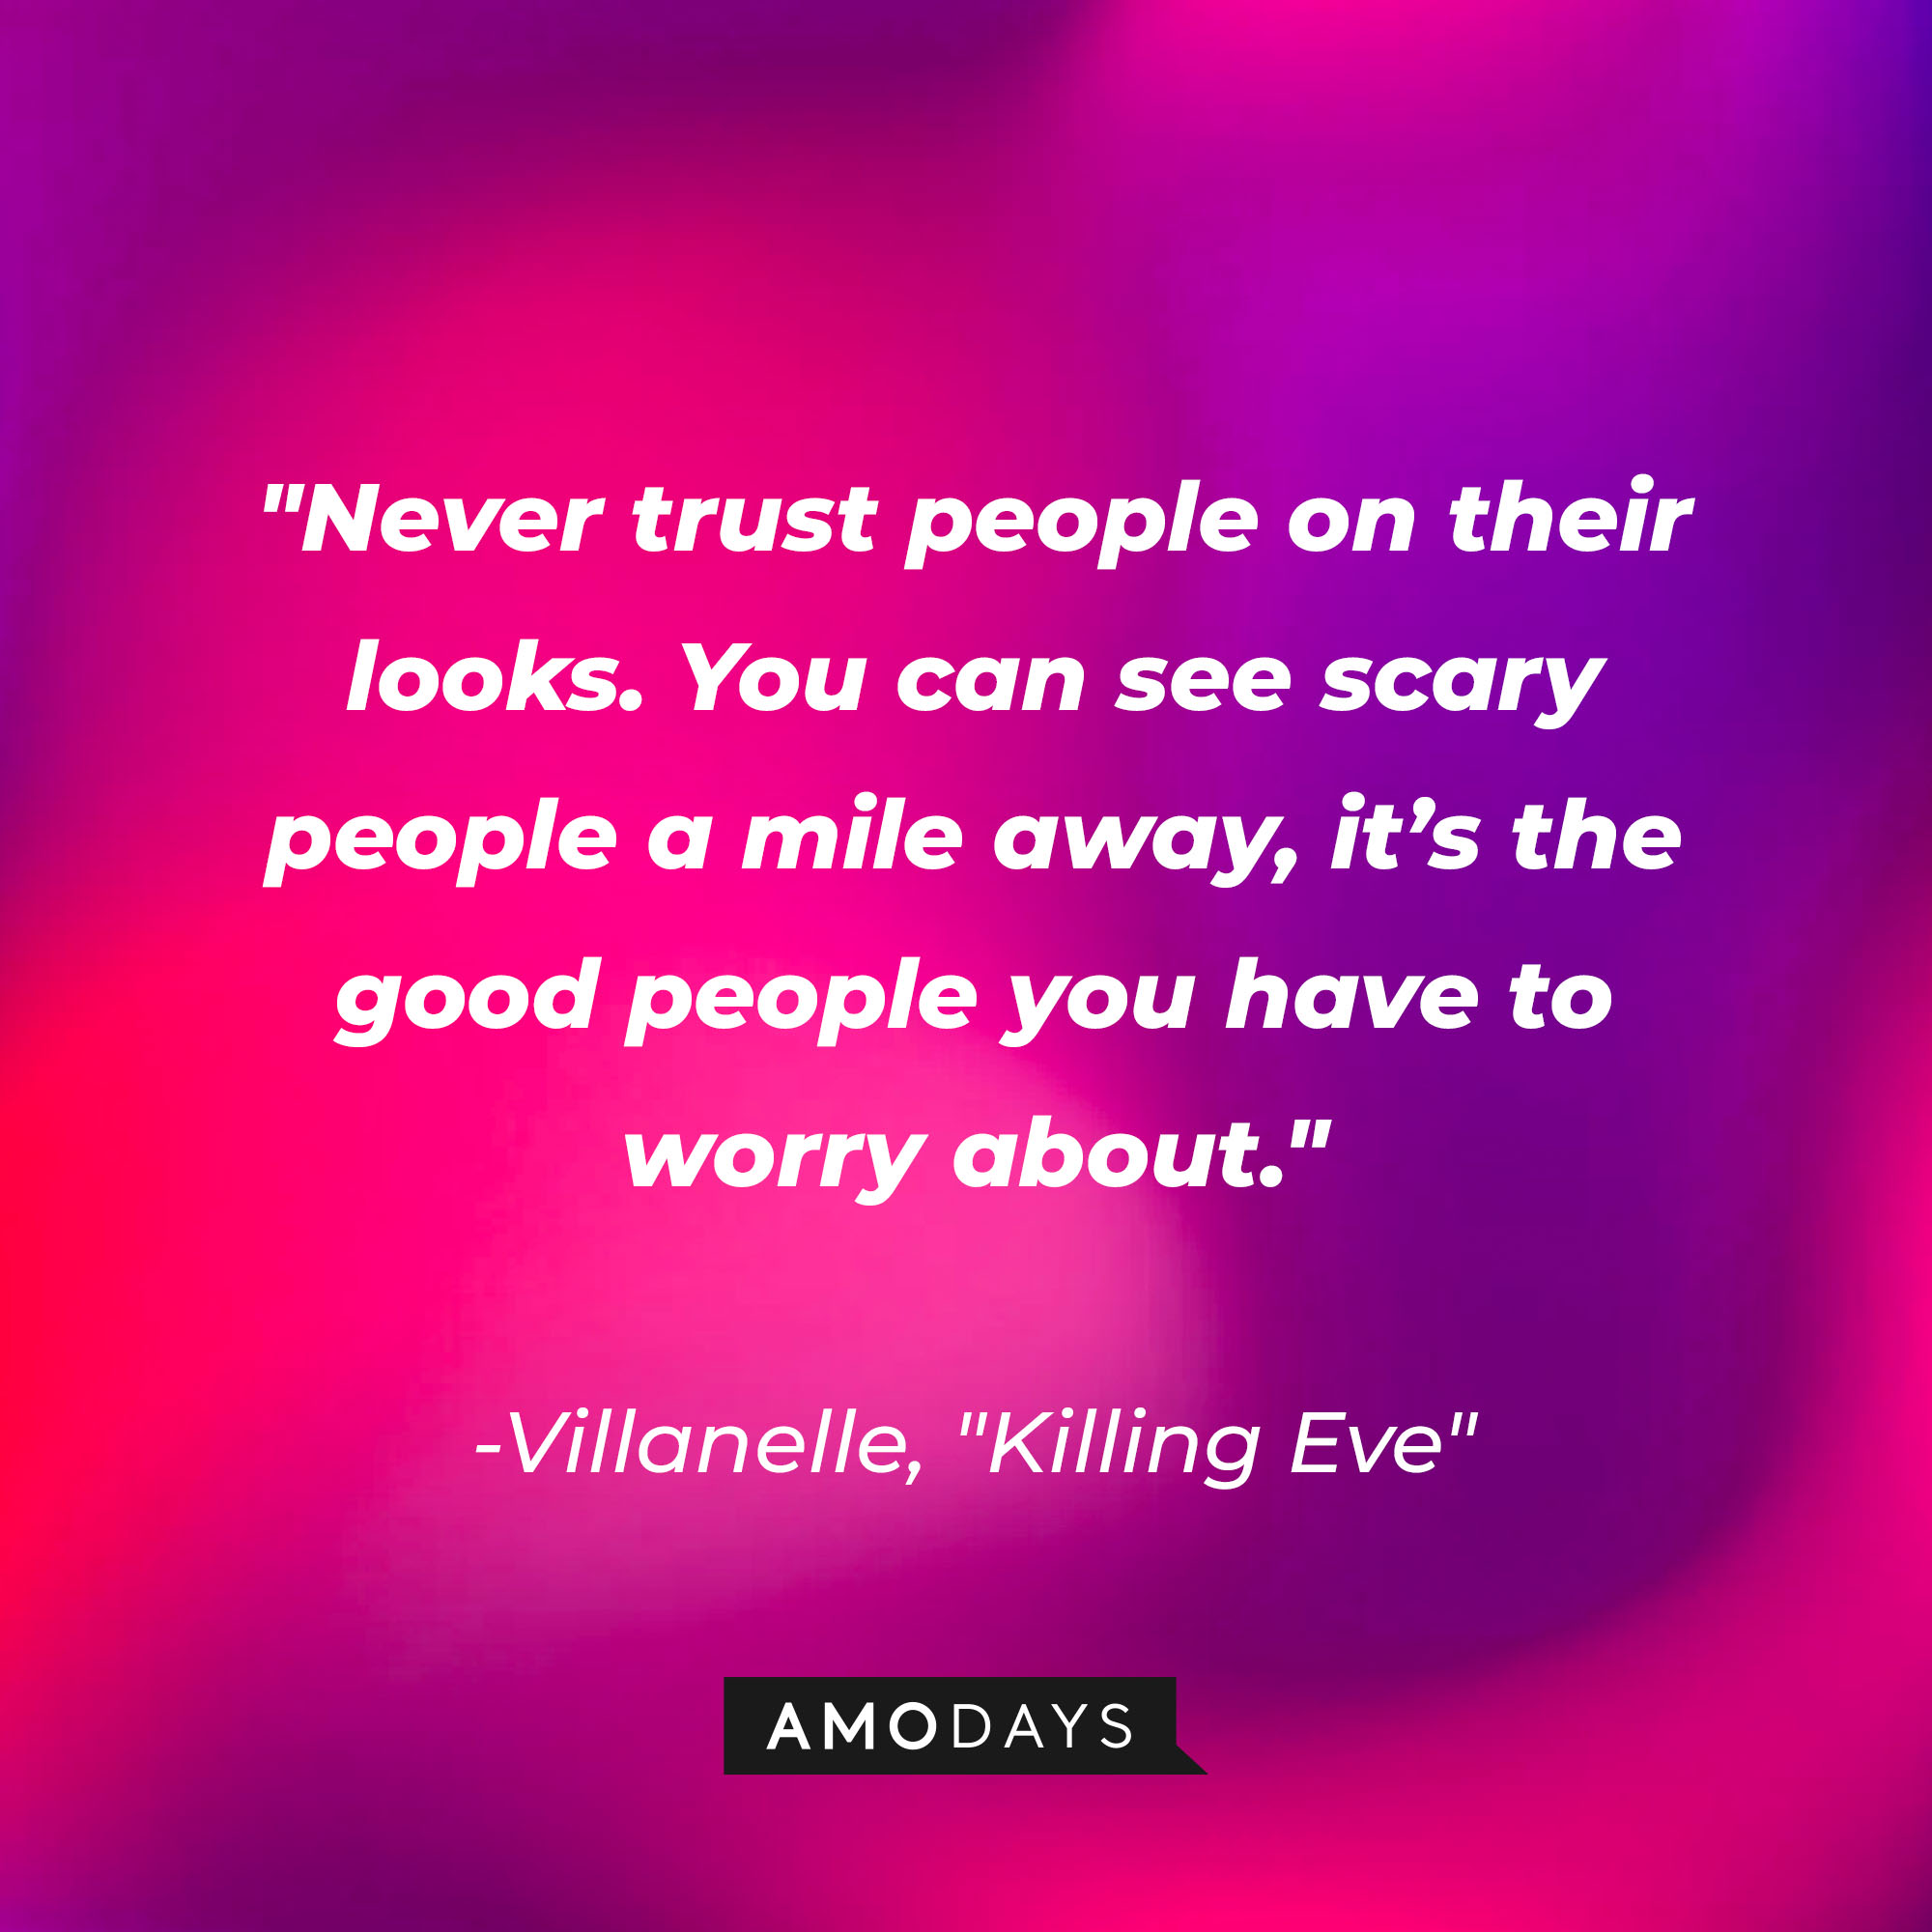 Villanelle's quote: "Never trust people on their looks. You can see scary people a mile away, it’s the good people you have to worry about." | Source: Amodays